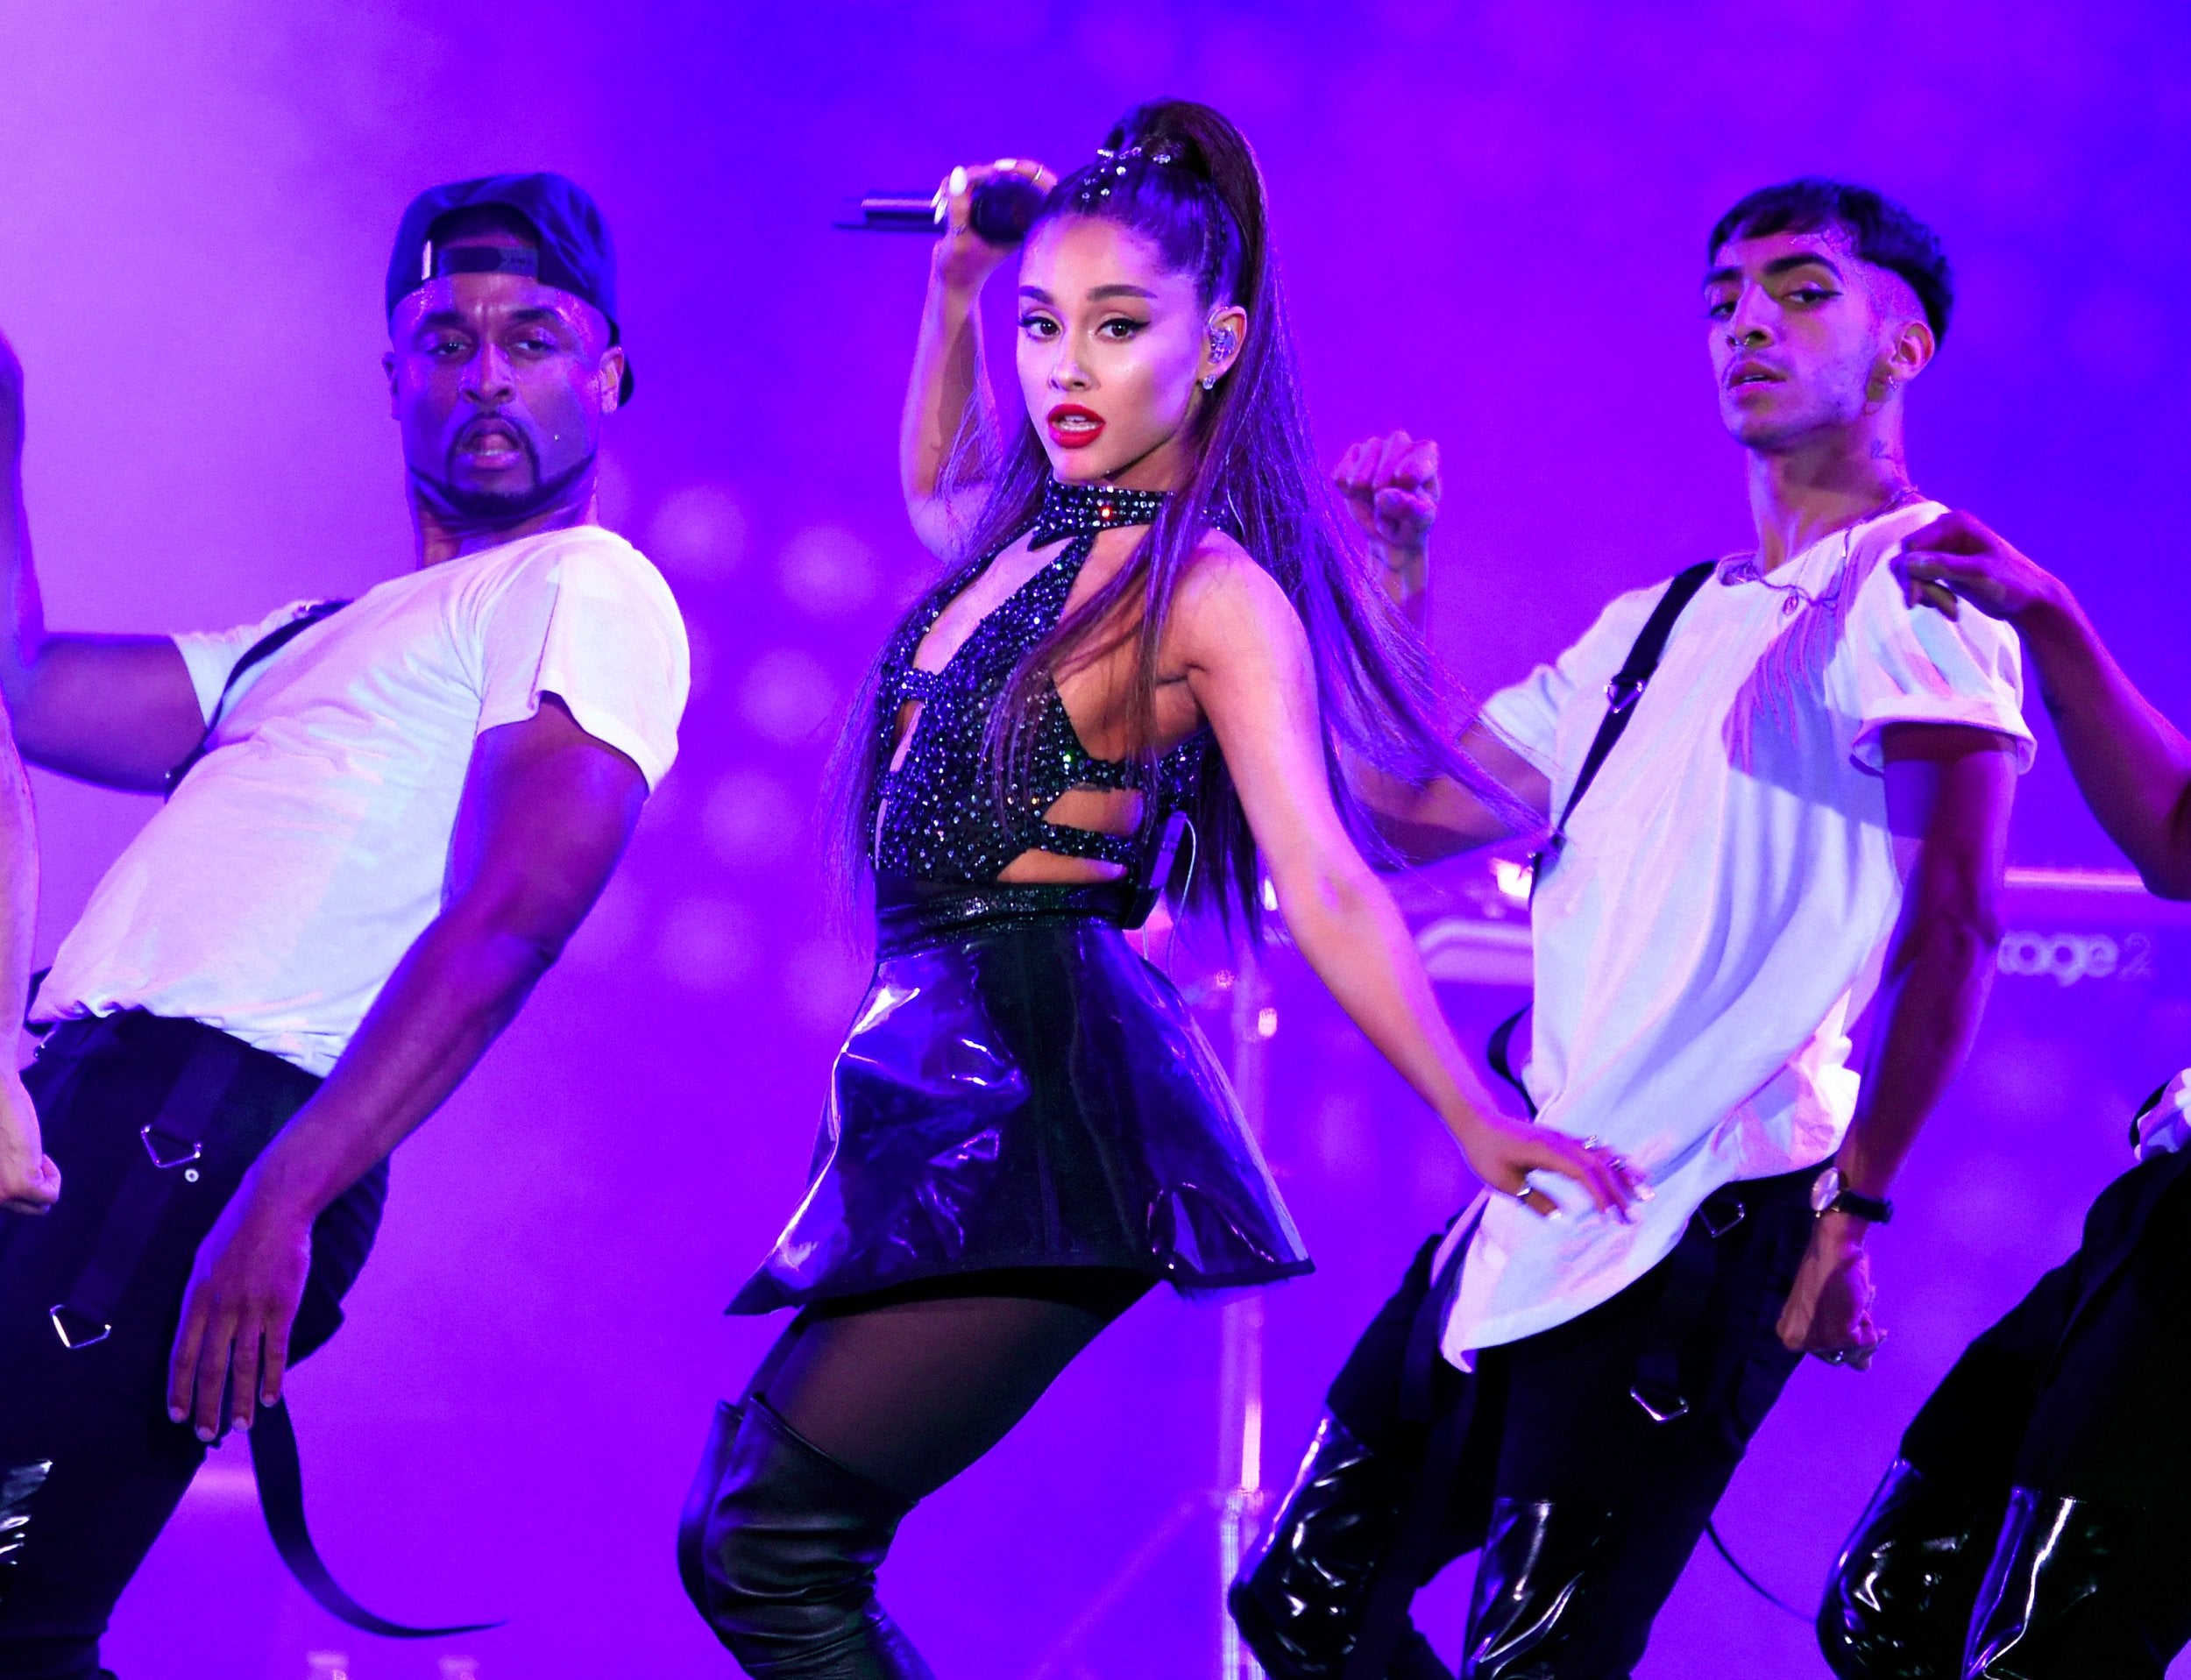 Publication INTO faced a backlash after publishing an opinion piece that suggested Ariana Grande’s new video was ‘surprisingly anti-queer’